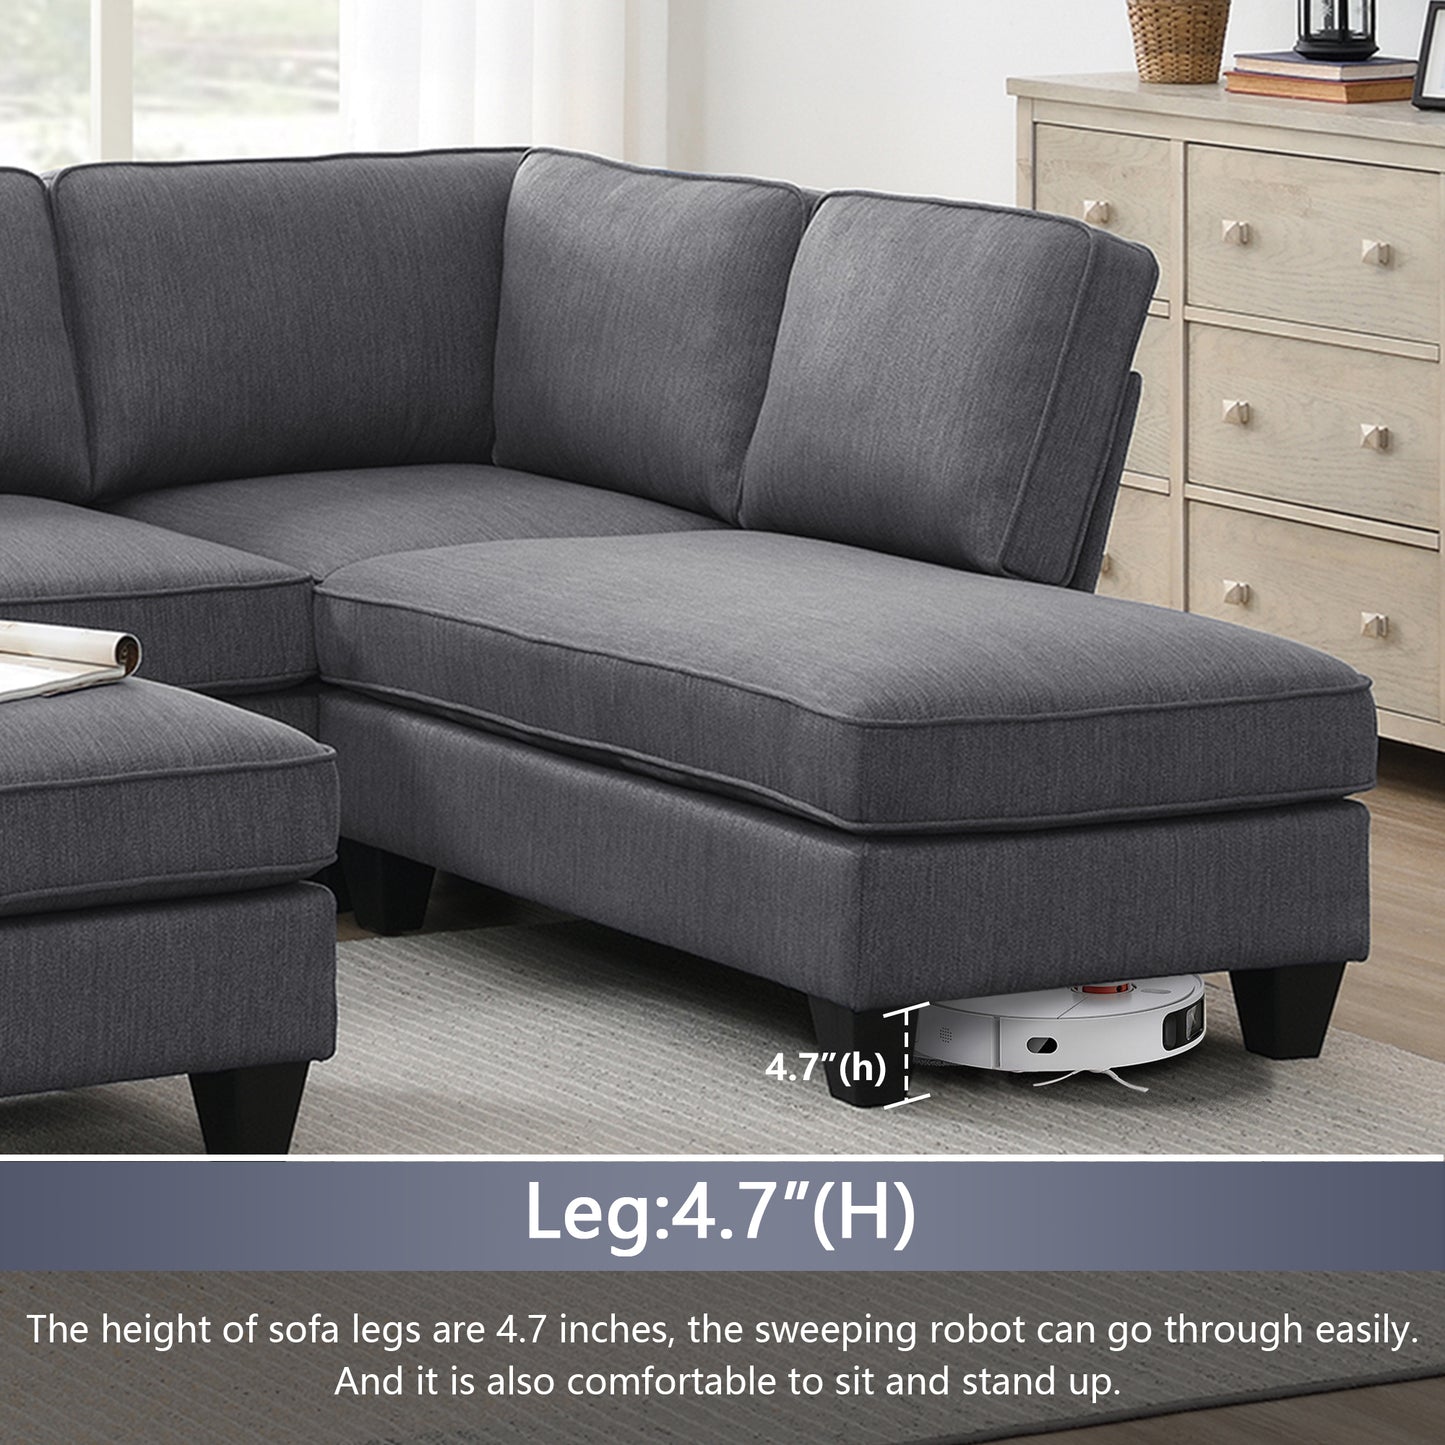 Modern L-shaped Sectional Sofa with Chaise Lounge and Convertible Ottoman